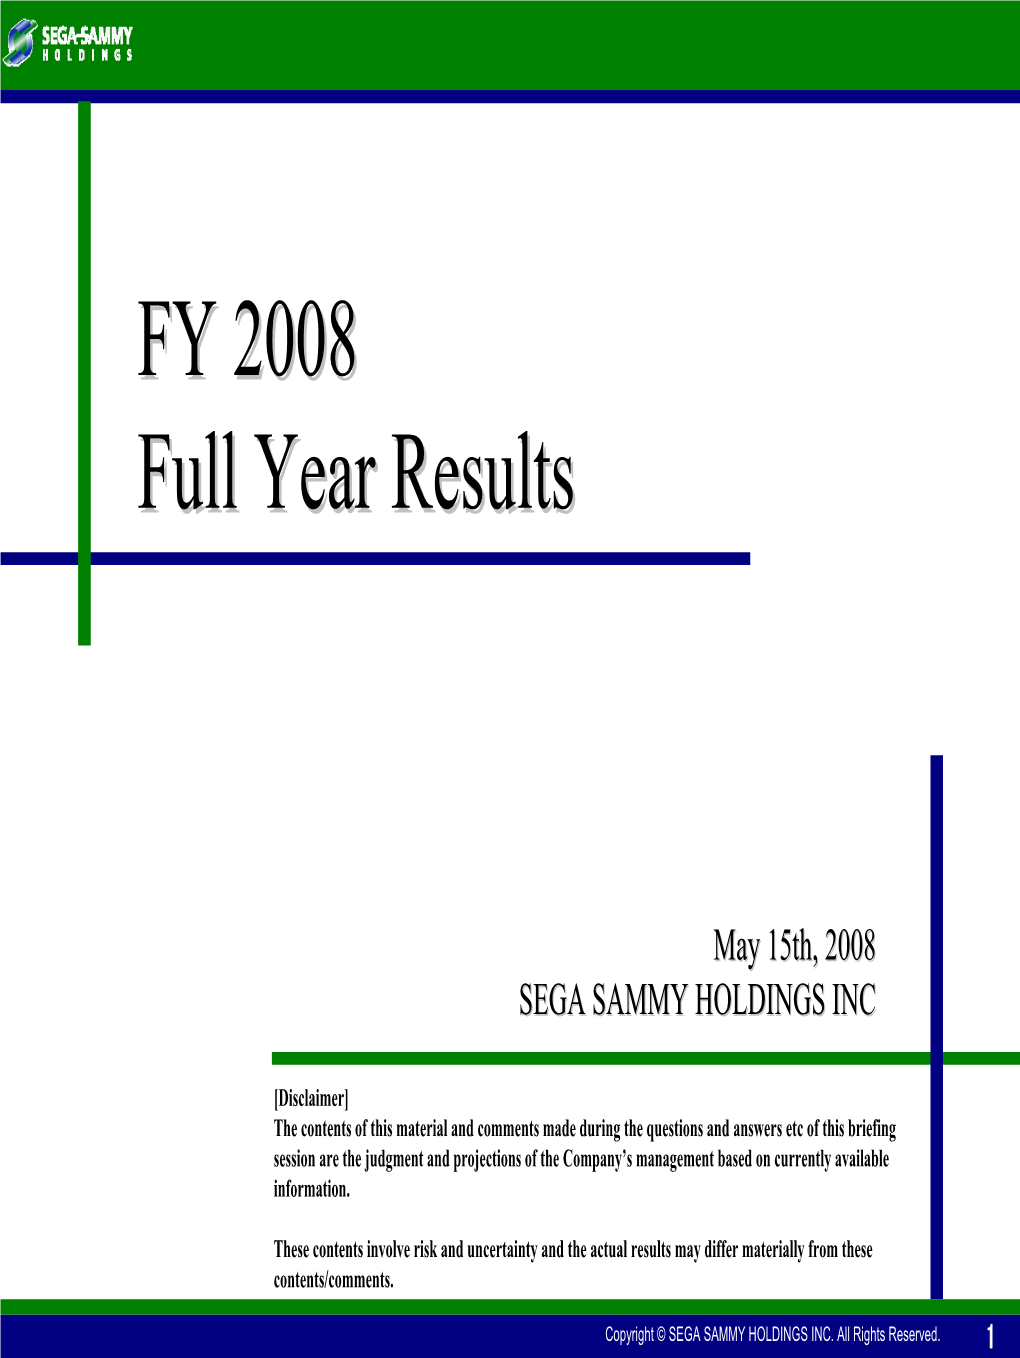 FY 2008 Full Year Results